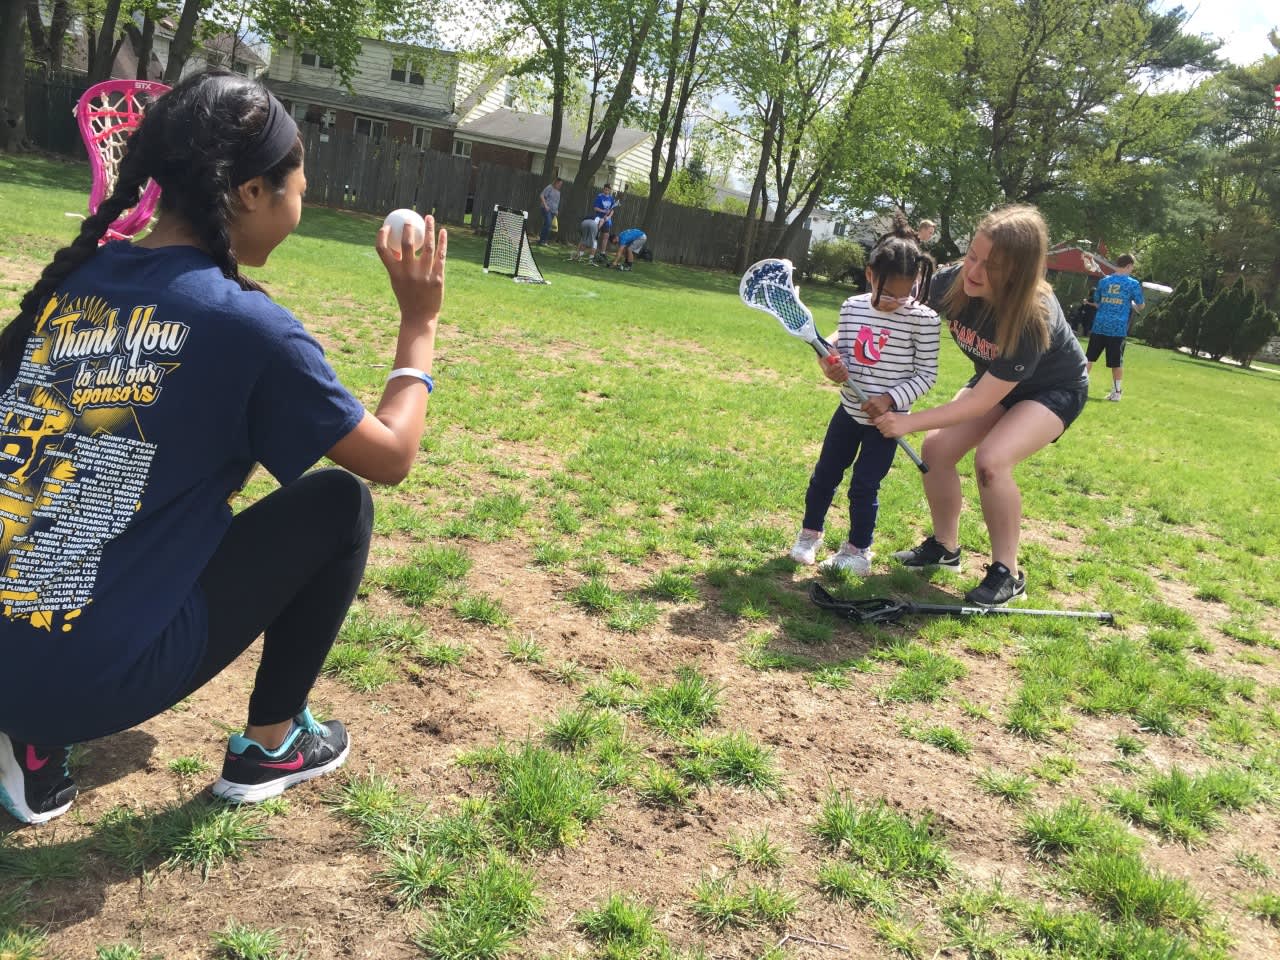 Saddle Brook High School varsity lacrosse players Kayla Chowdhury and Karissa Quimby give a young player some pointers. The team will hold a car wash fundraiser May 7.